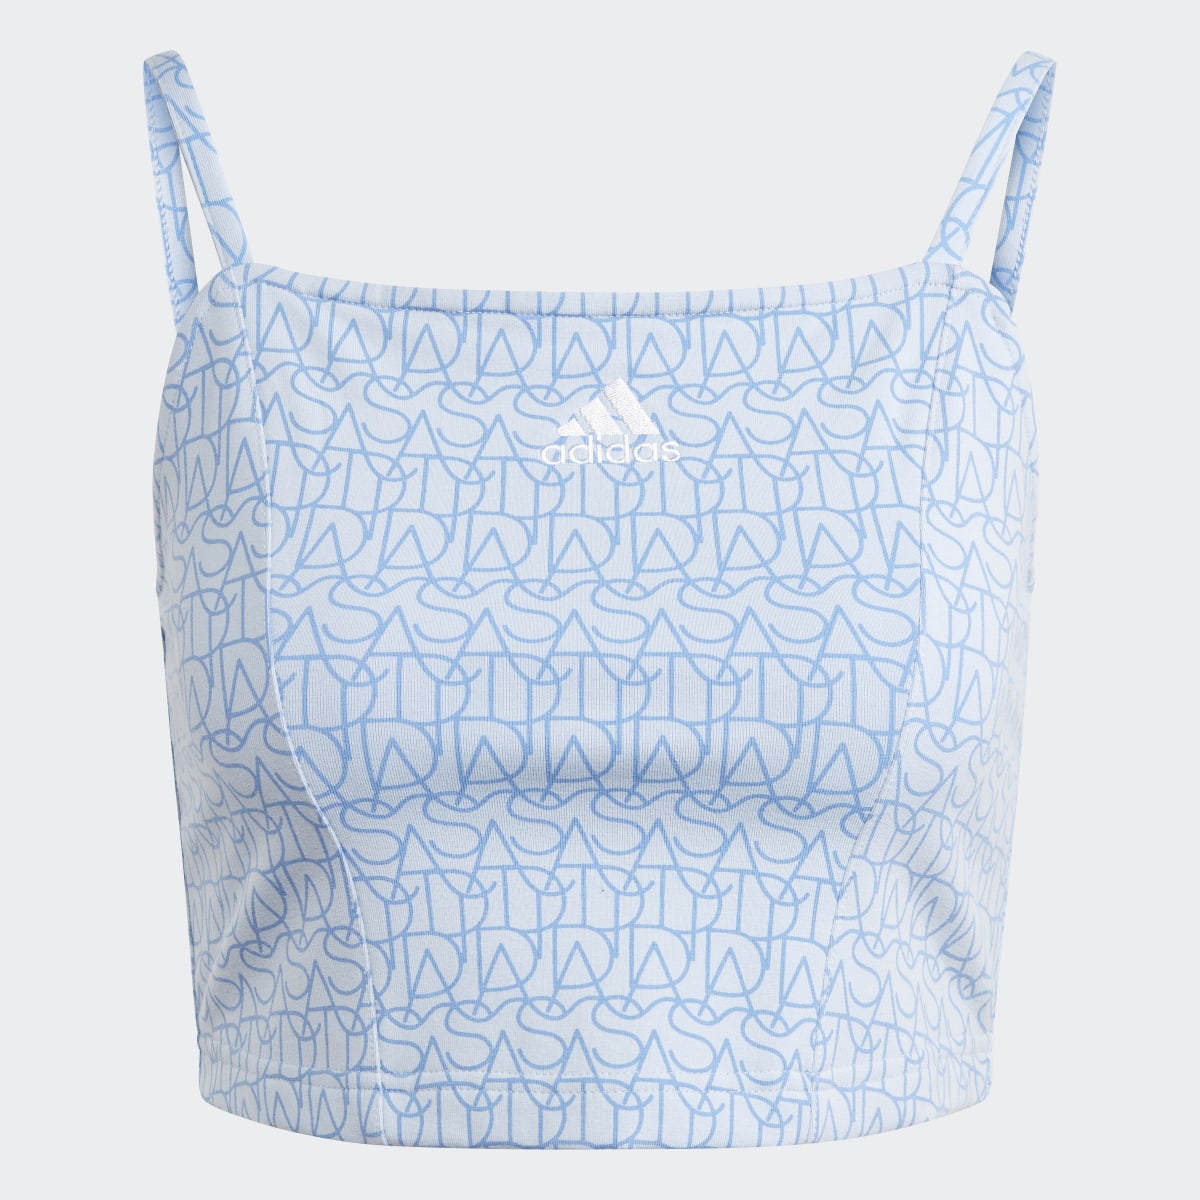 Adidas Allover adidas Graphic Corset-Inspired Atlet. 5